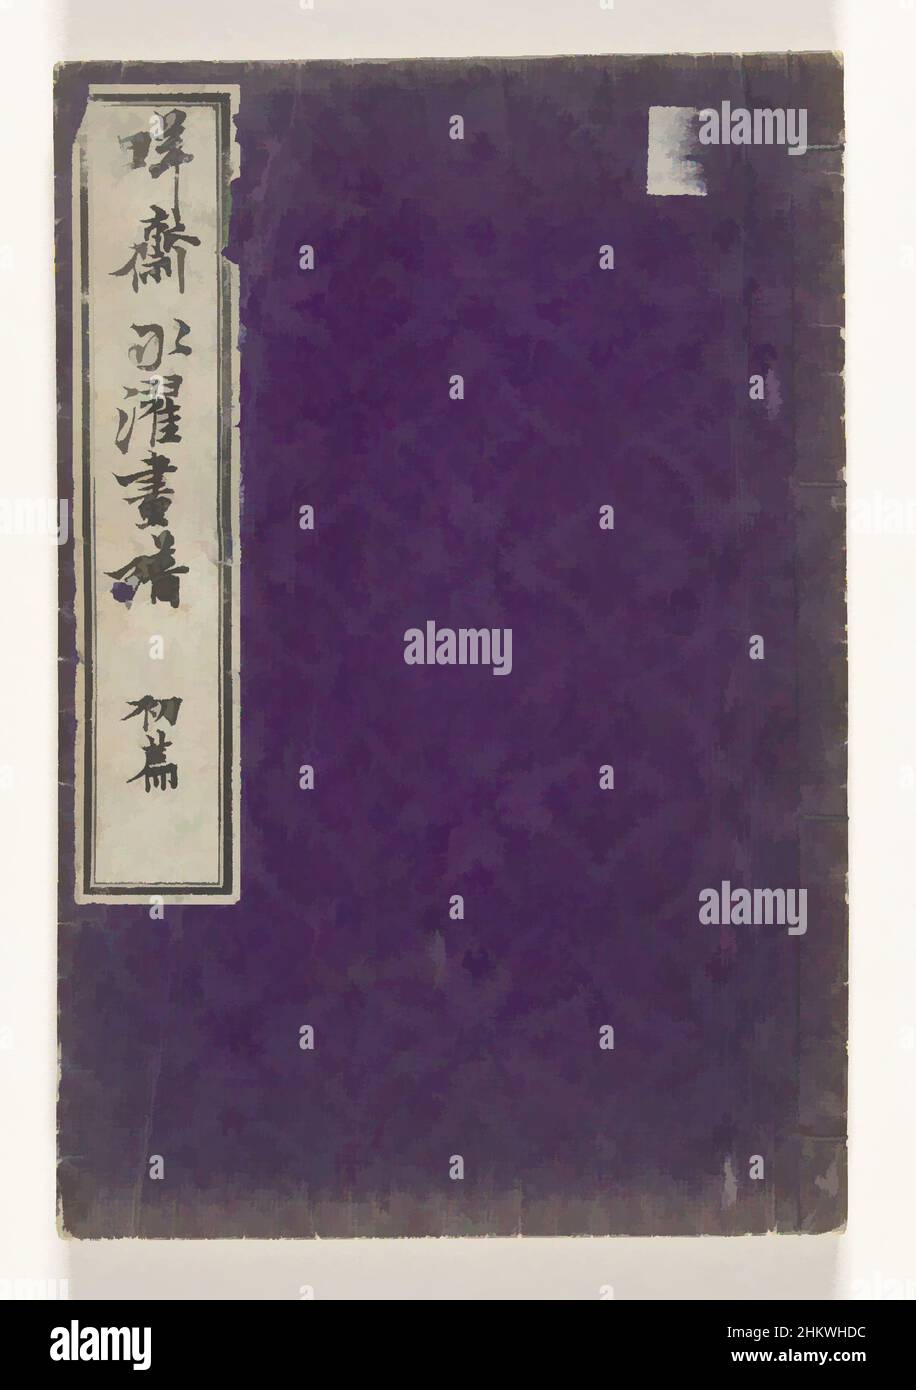 Art inspired by Print book by Sensai Eitaku, Sensai Eitaku gafu, One volume; purple cover; top left title page; red cover page, title page; 22 sheets, numbered: 1-2, preface; 1-20a, Japanese mythological scenes; 20b, colophon; cover page, list of booksellers., Kobayashi Eitaku, Ootsuka, Classic works modernized by Artotop with a splash of modernity. Shapes, color and value, eye-catching visual impact on art. Emotions through freedom of artworks in a contemporary way. A timeless message pursuing a wildly creative new direction. Artists turning to the digital medium and creating the Artotop NFT Stock Photo